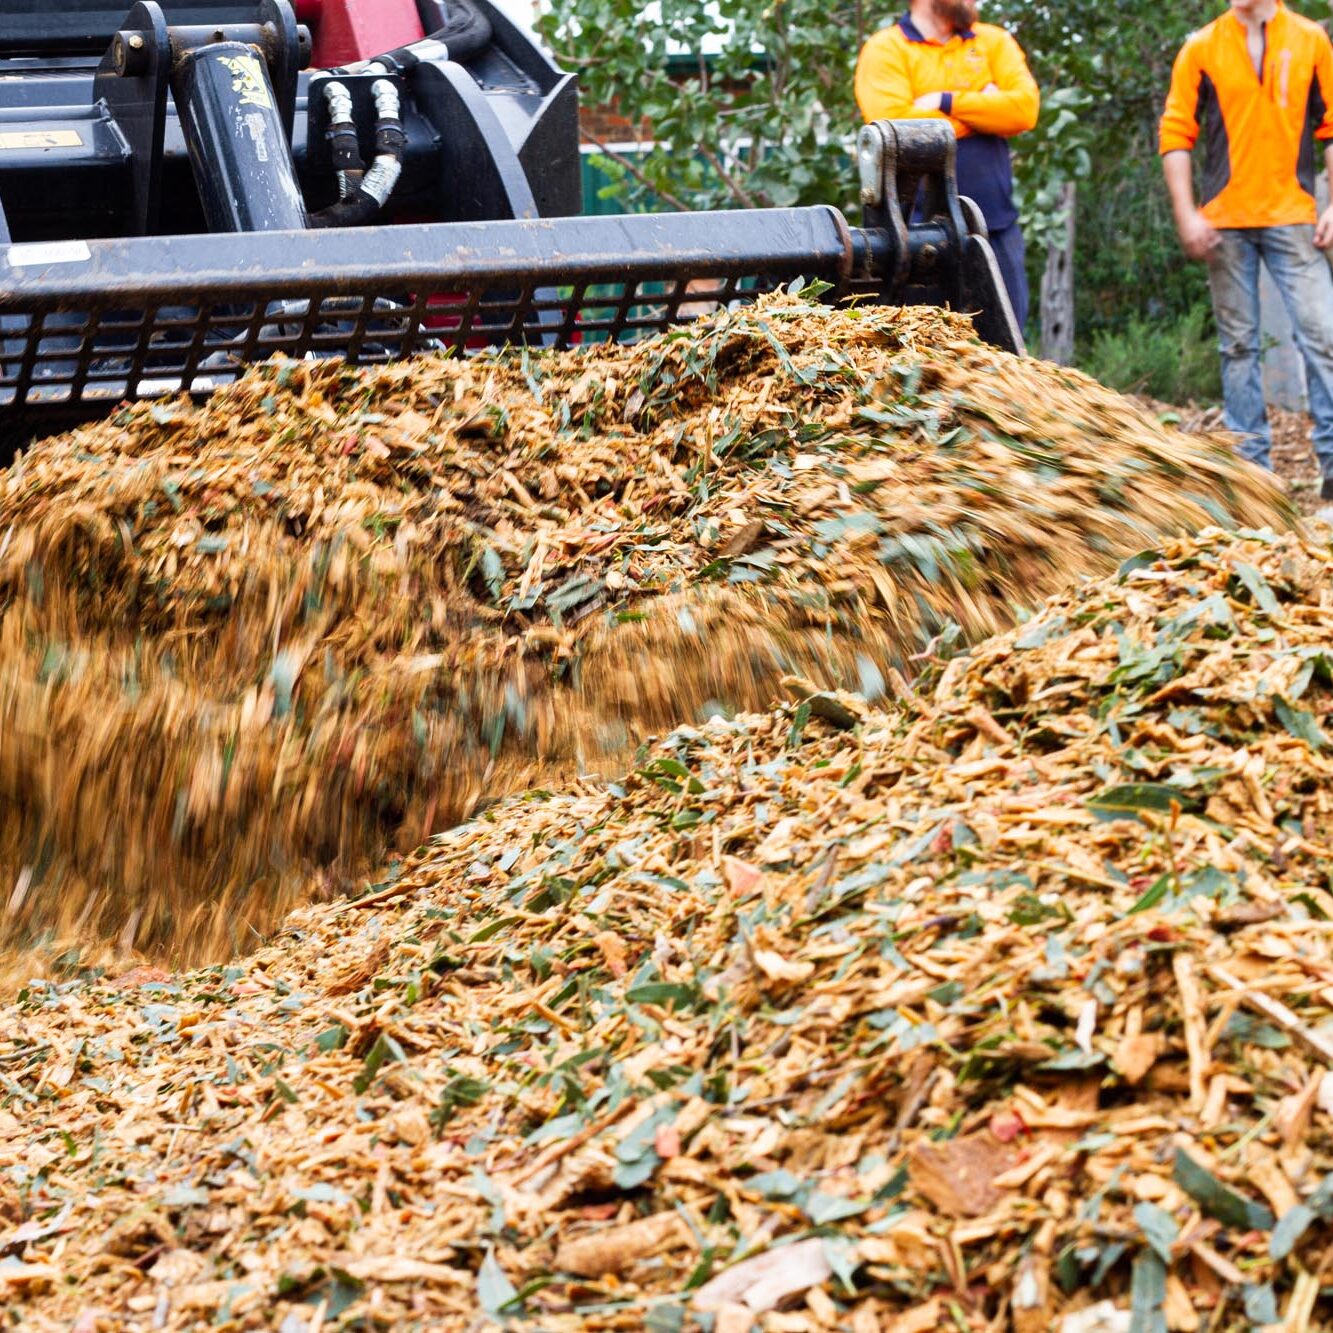 A large pile of mulch being dumped by a tractor at Arbortec Tree Service.